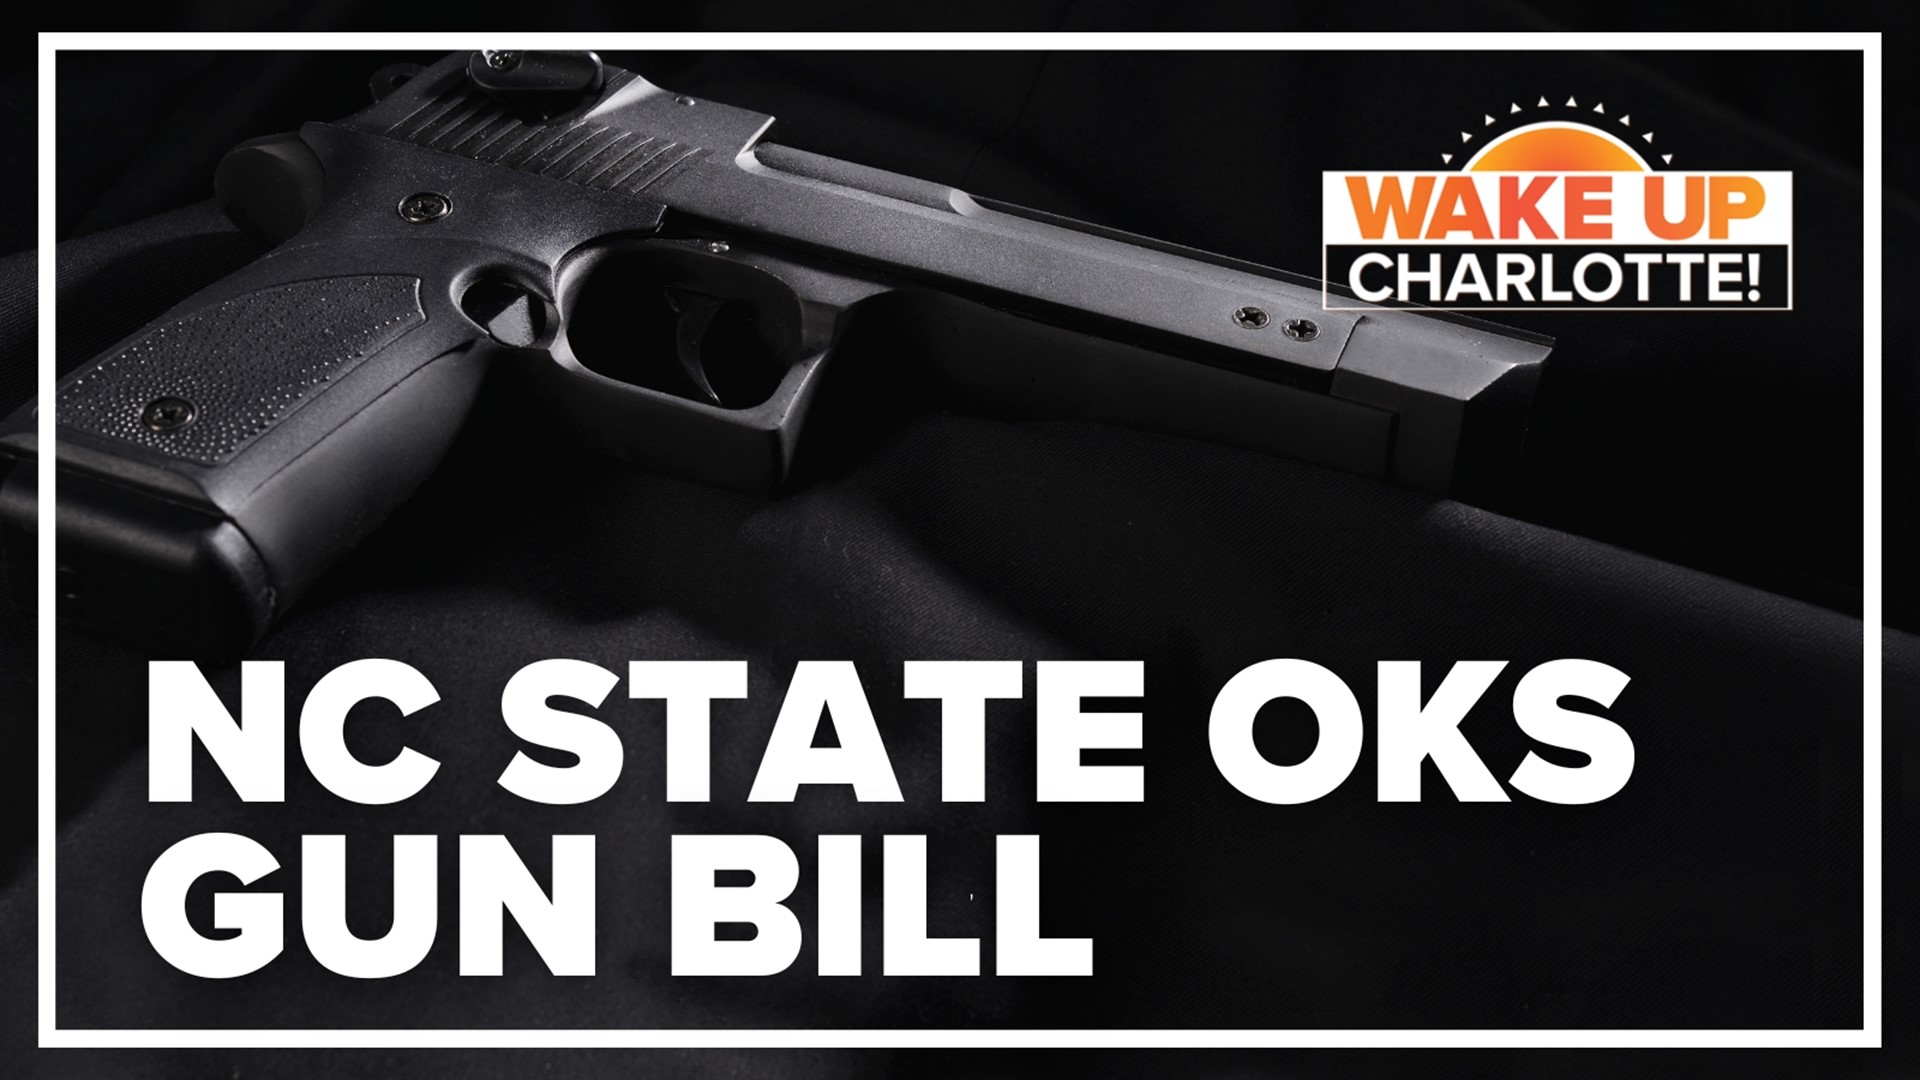 A bill sponsor calls the measure “common-sense laws” to protect gun rights. Democrats say getting rid of purchase permits would lead to more gun violence.